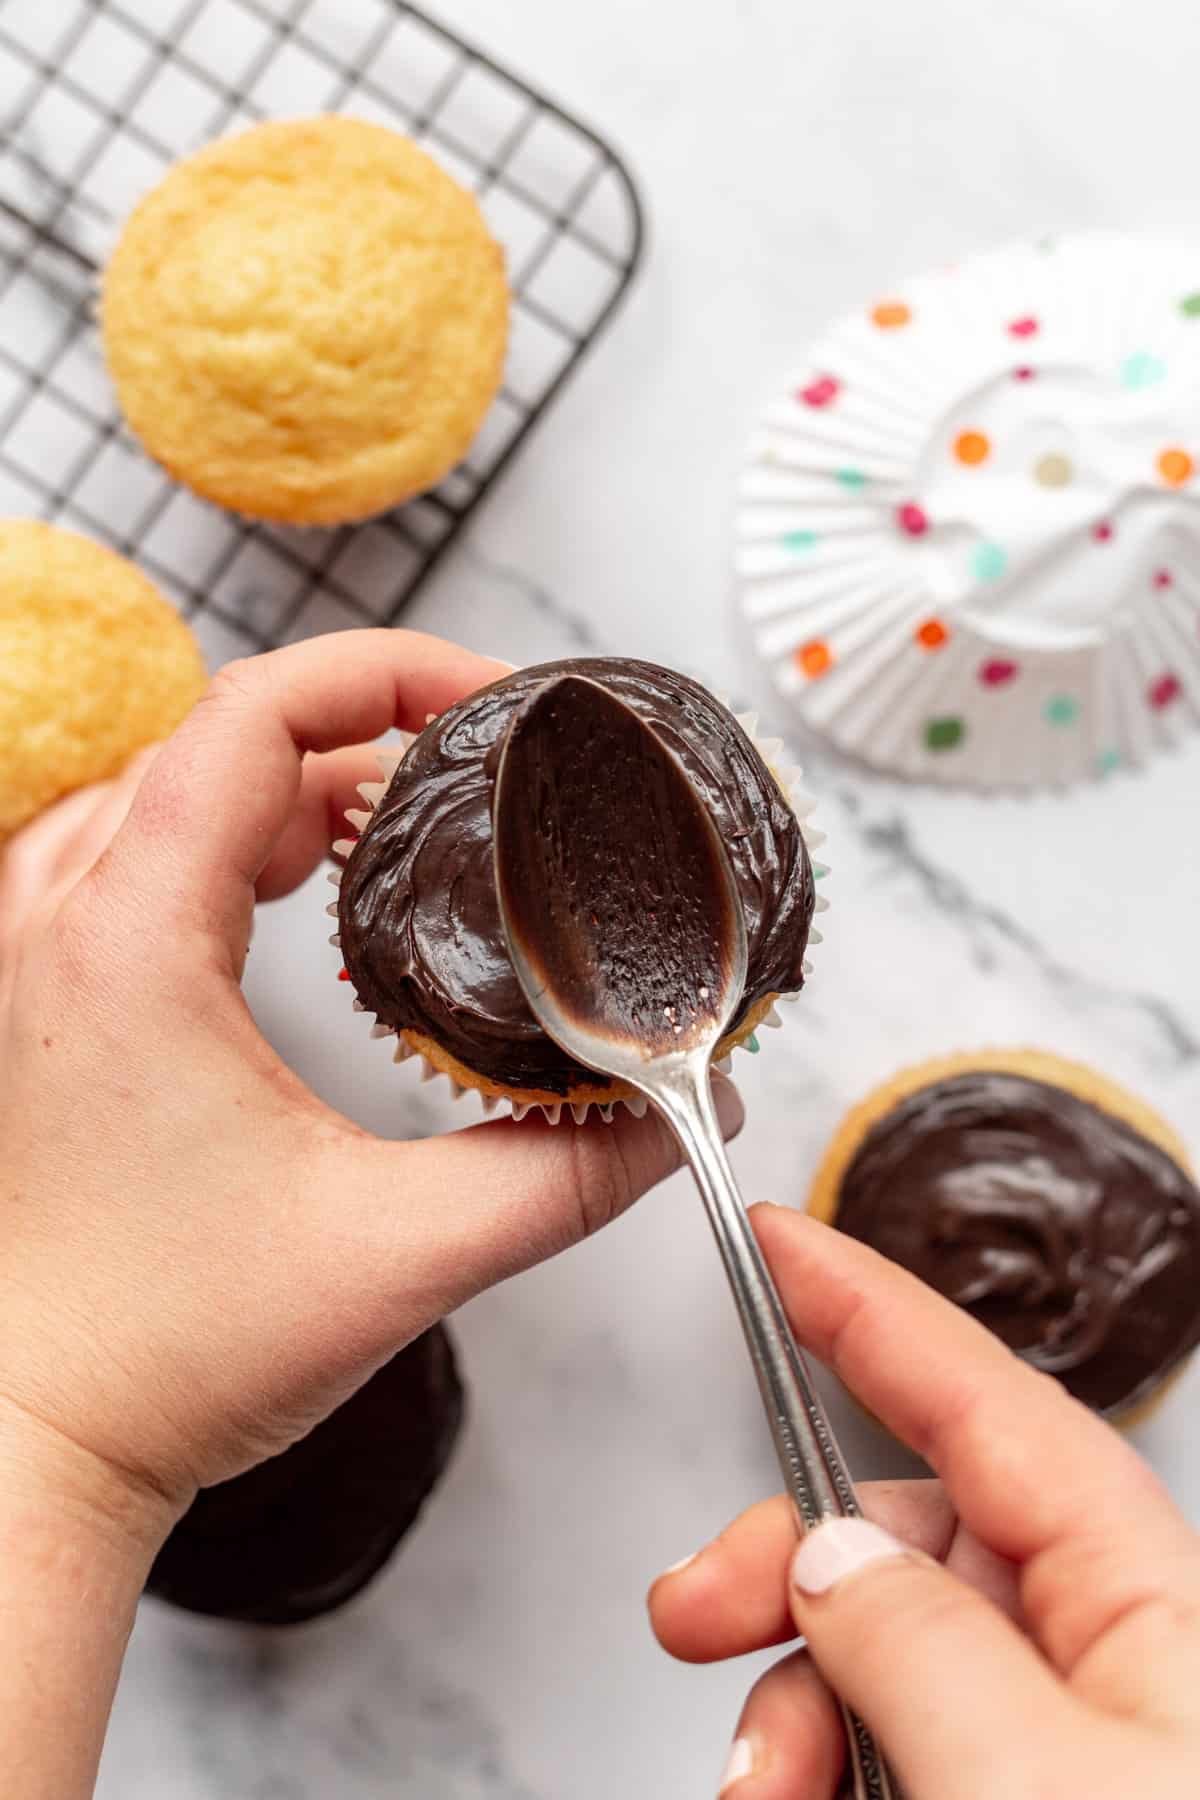 using a spoon to spread chocolate frosting on a vanilla cupcake